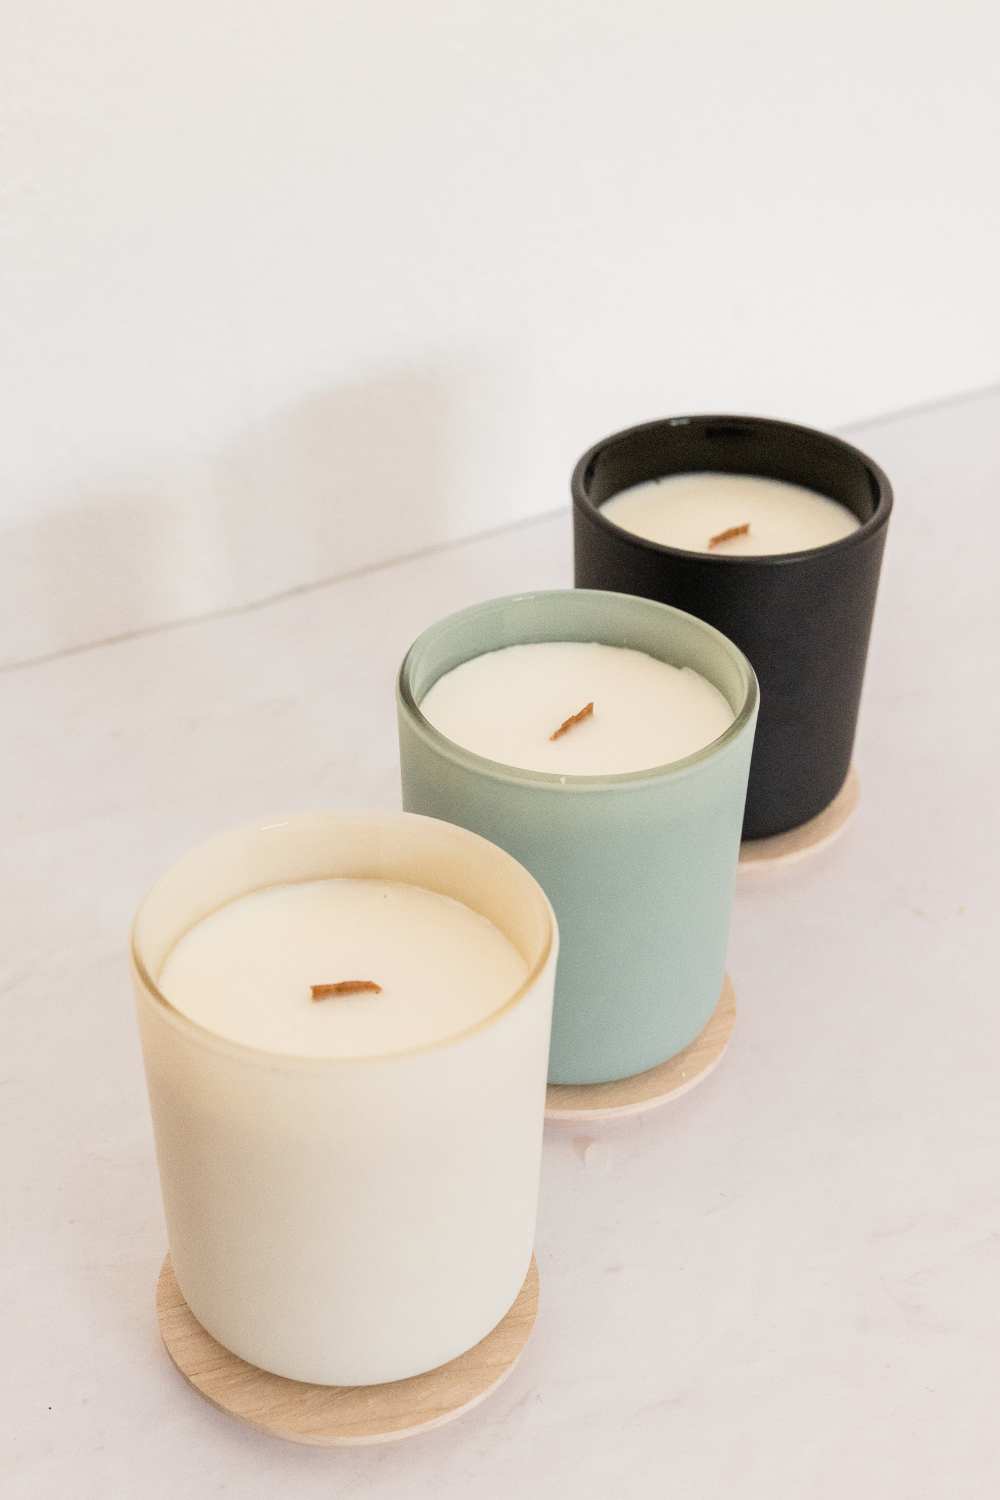 Do You Need to Trim Candle Wicks? (Find Out Why You Should) - The Wax  Chandler